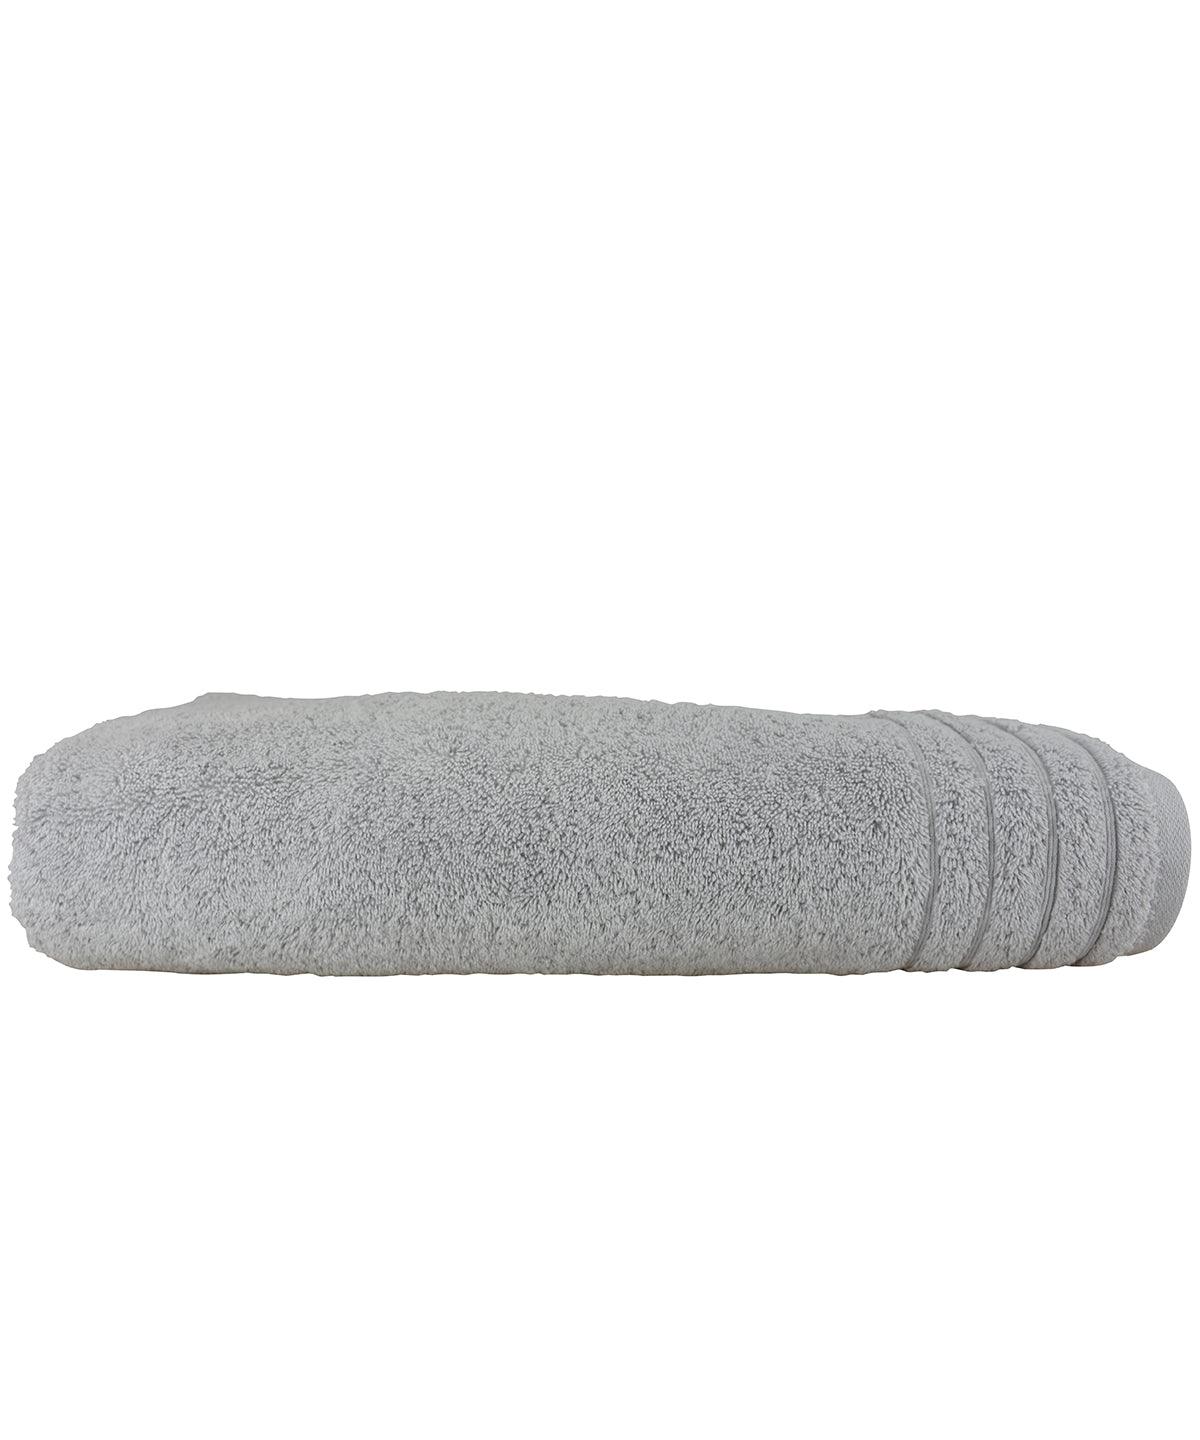 Grey - ARTG® Organic beach towel Towels A&R Towels Gifting & Accessories, Holiday Season, Homewares & Towelling, Must Haves, Organic & Conscious Schoolwear Centres